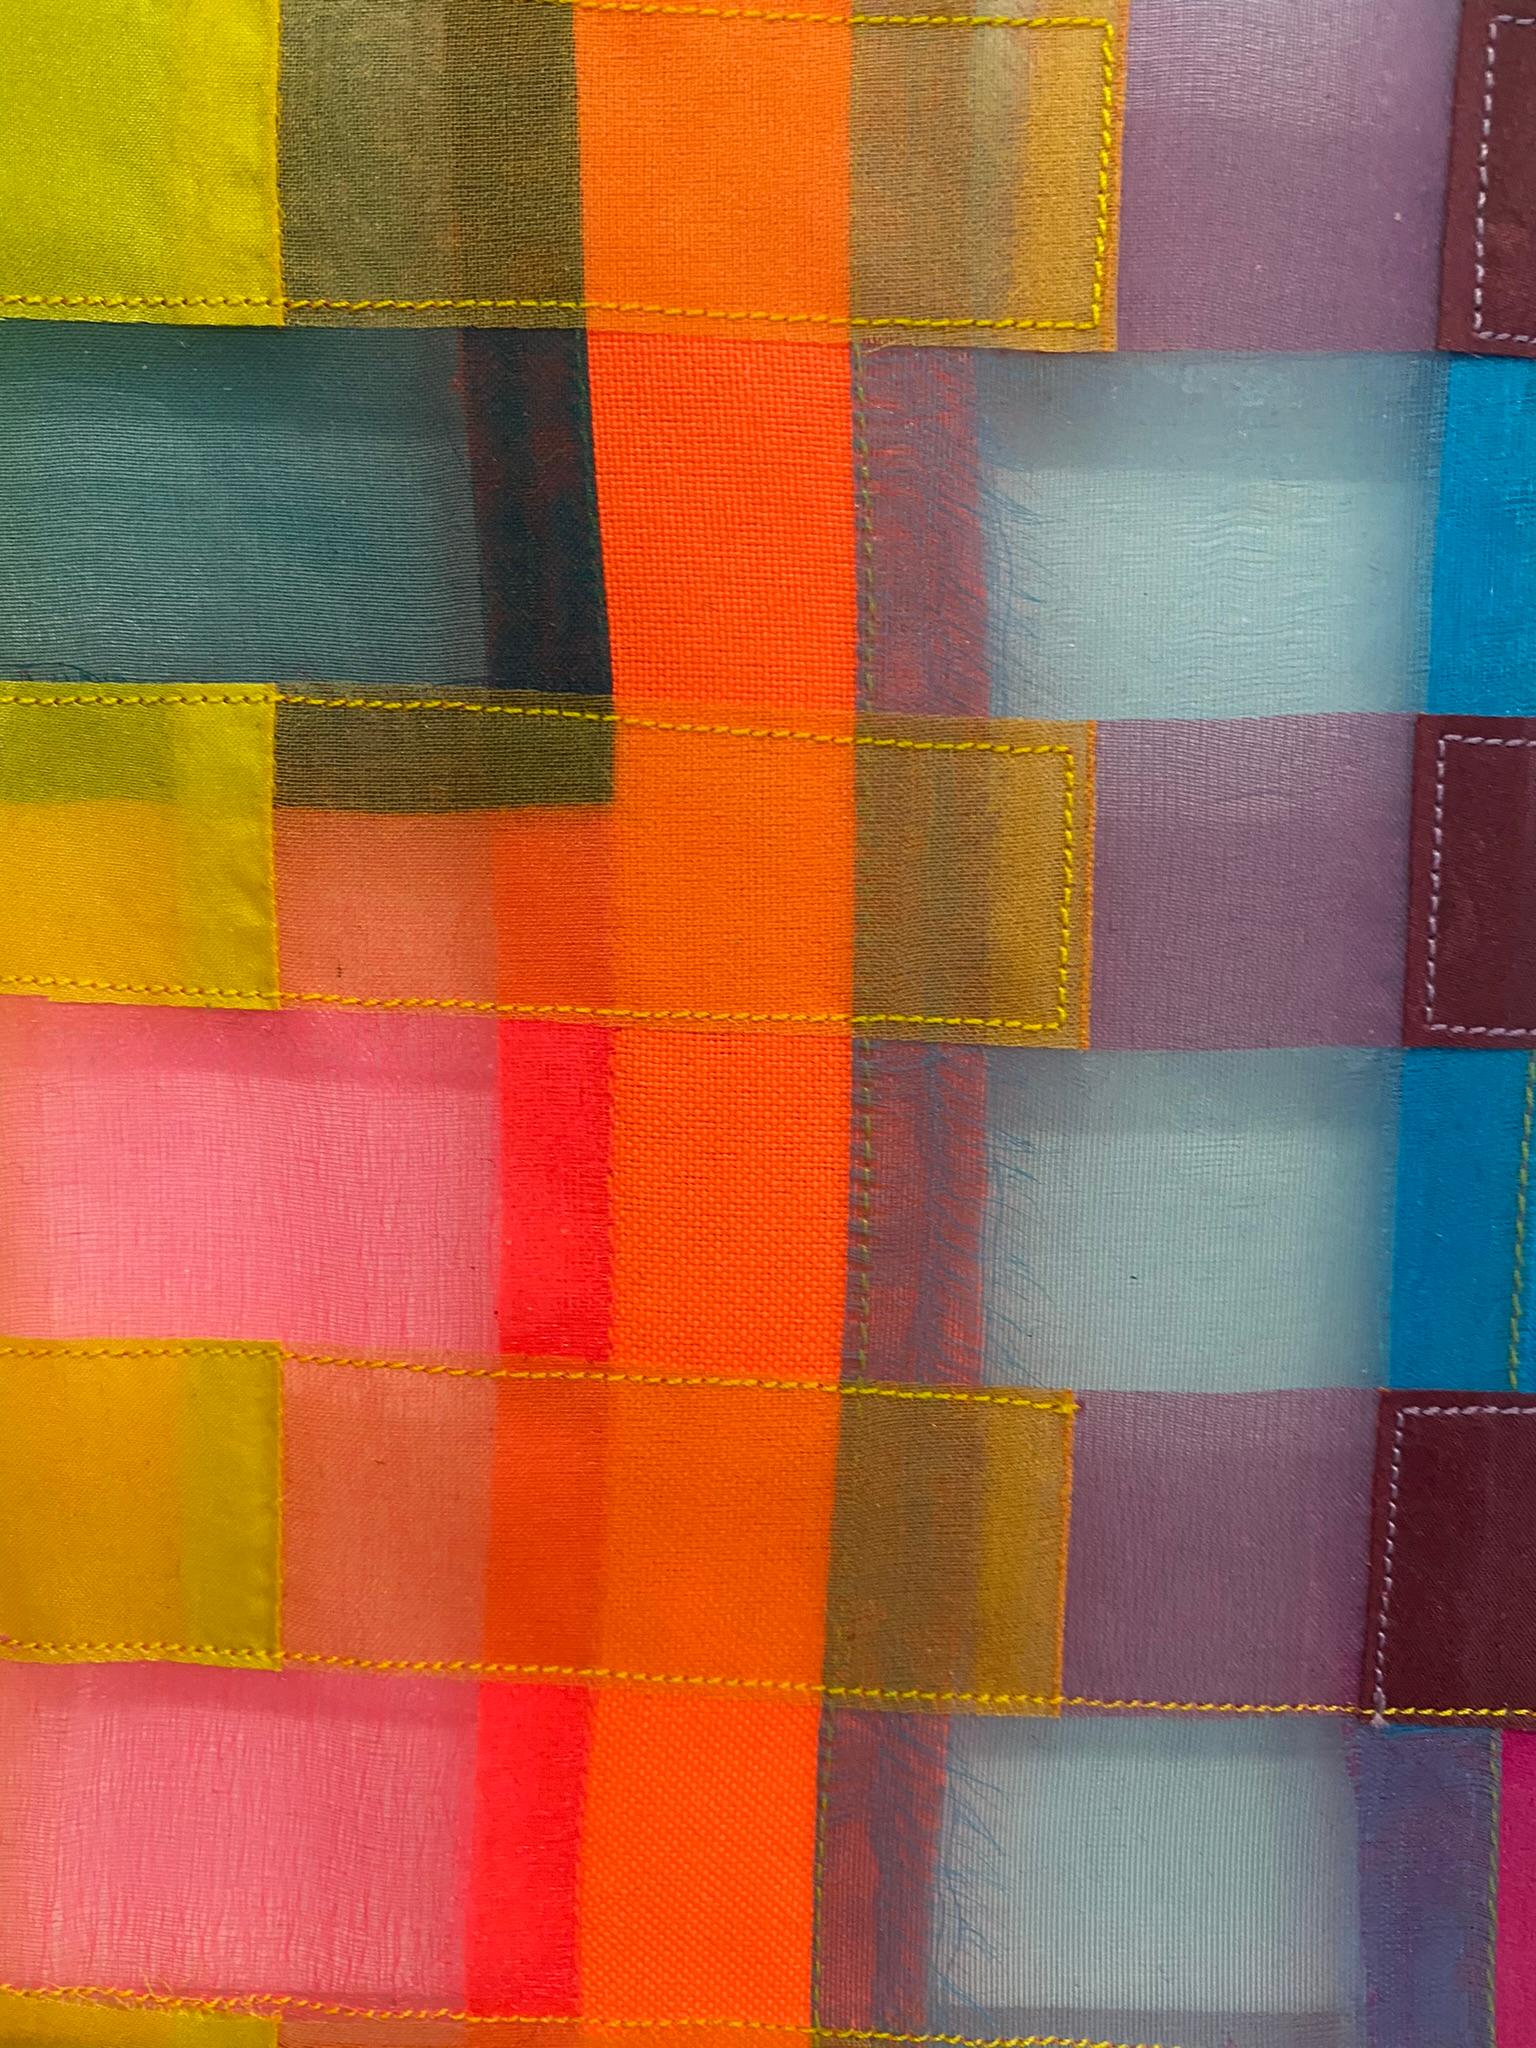 Untitled (0382), colorful abstract fabric sculpture 1